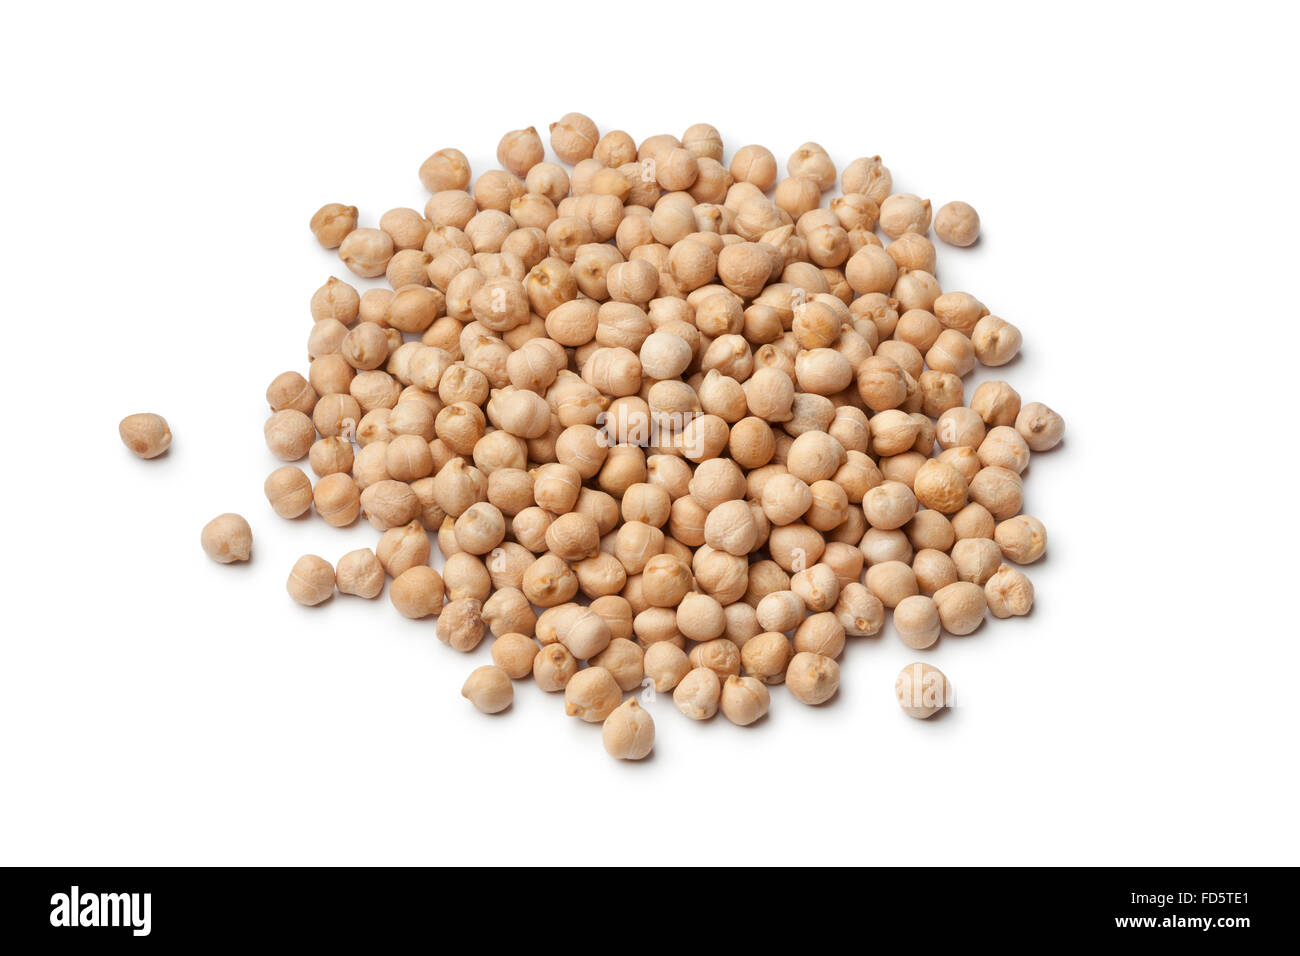 Heap of dried chickpeas on white background Stock Photo